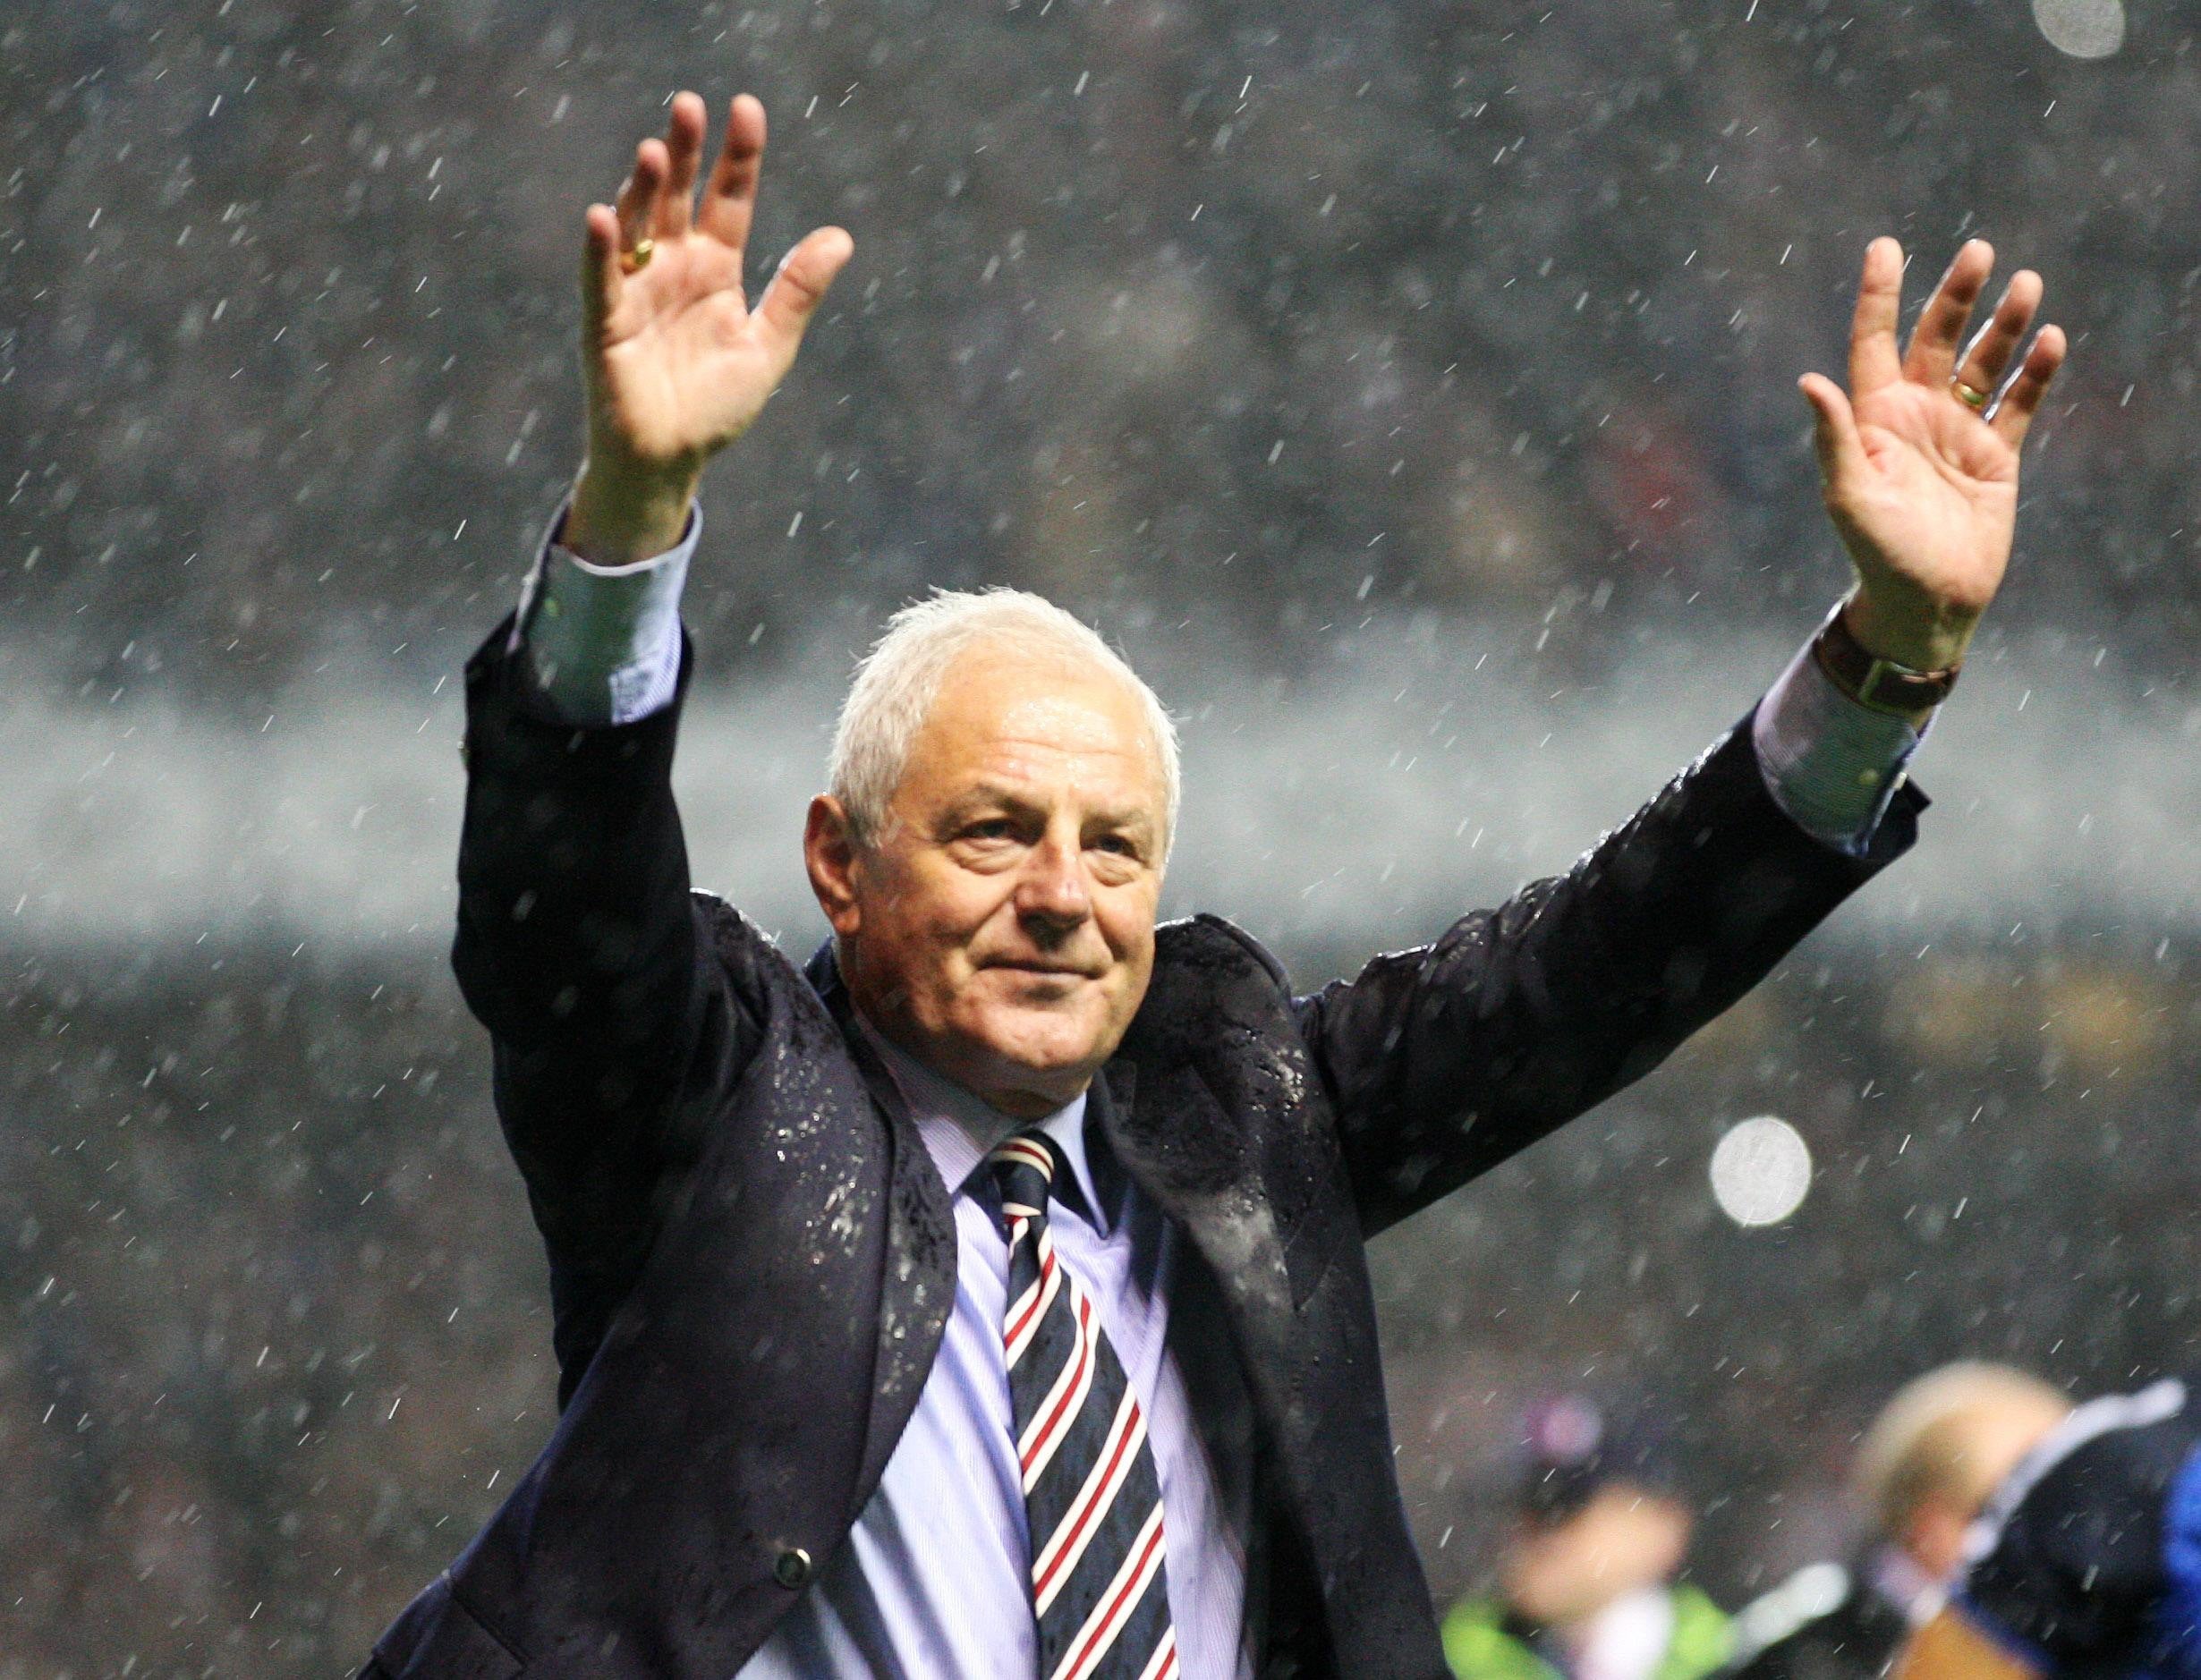 Walter Smith after his final match in charge of Rangers in 2011